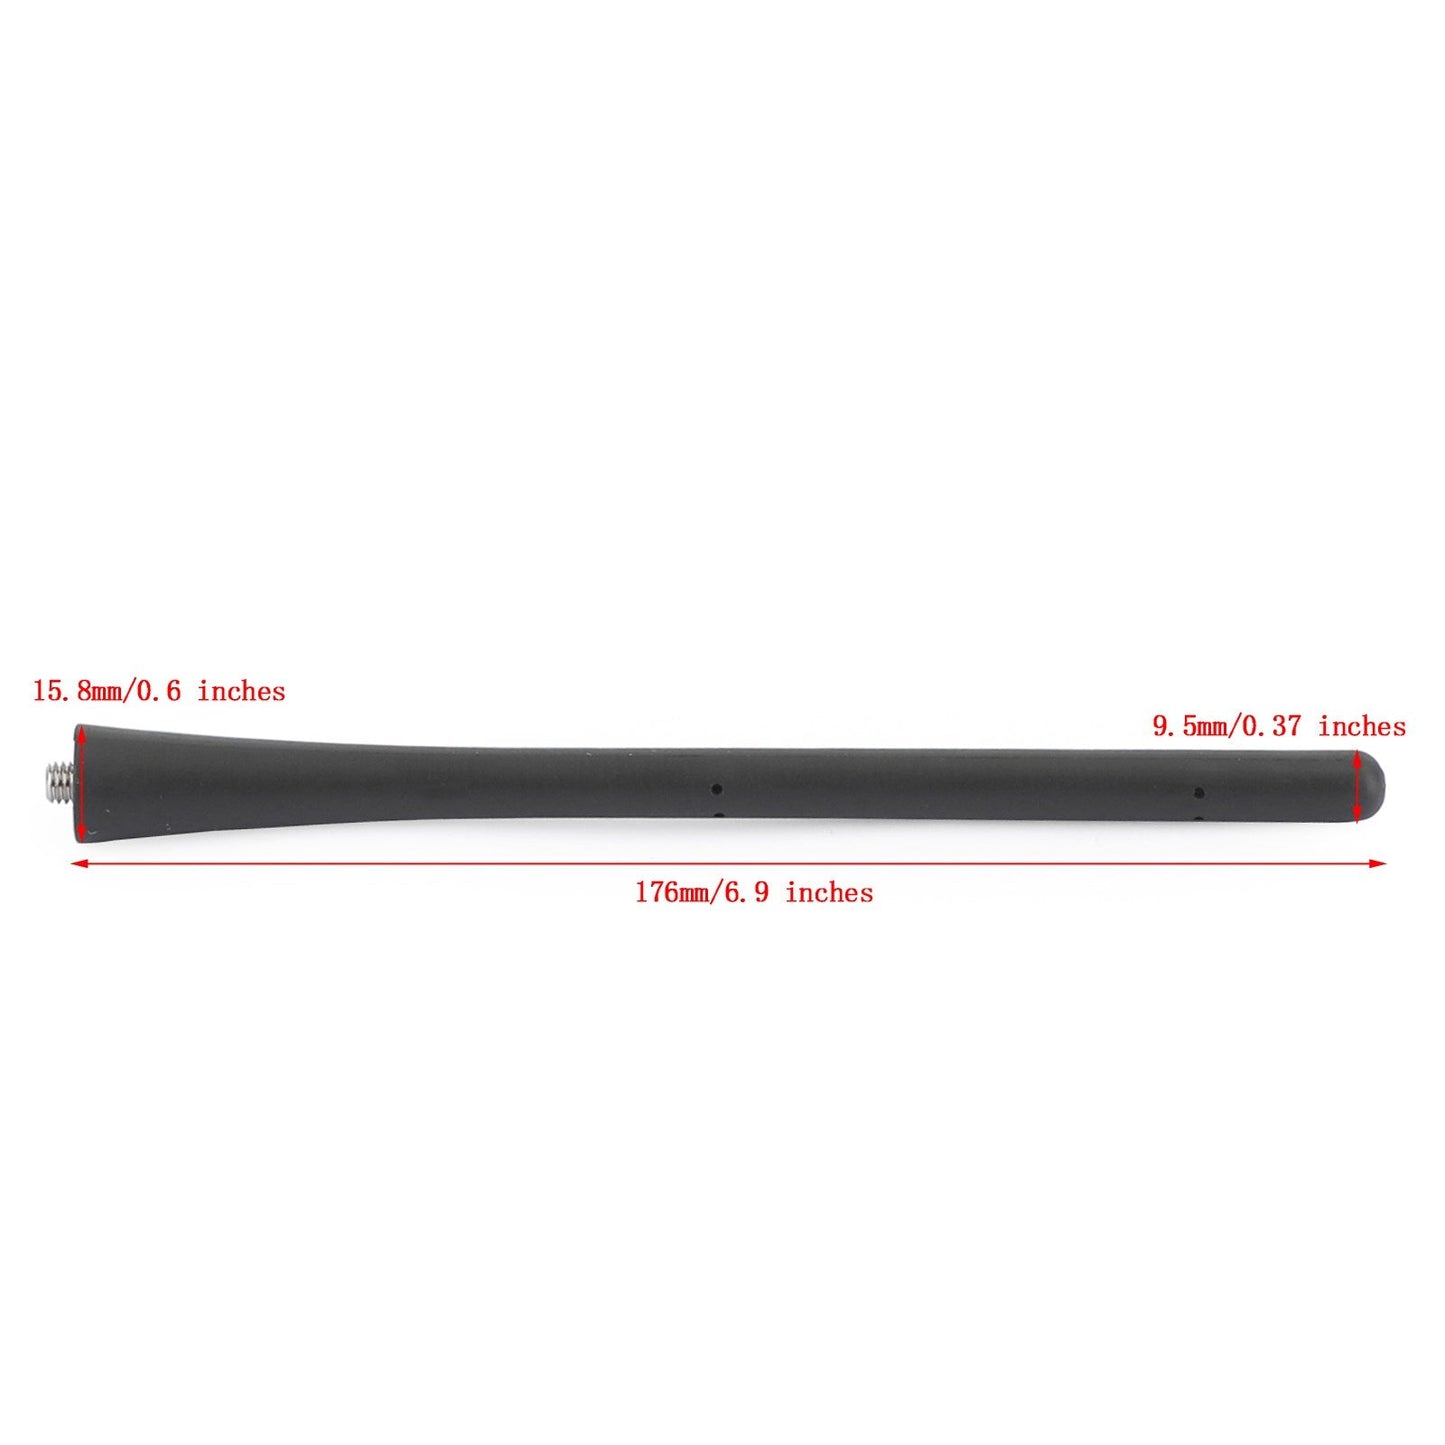 7Inch Rubber Signal Antenna For Ford F150 F250 F350 茂录?Ram 1500 2009-2019